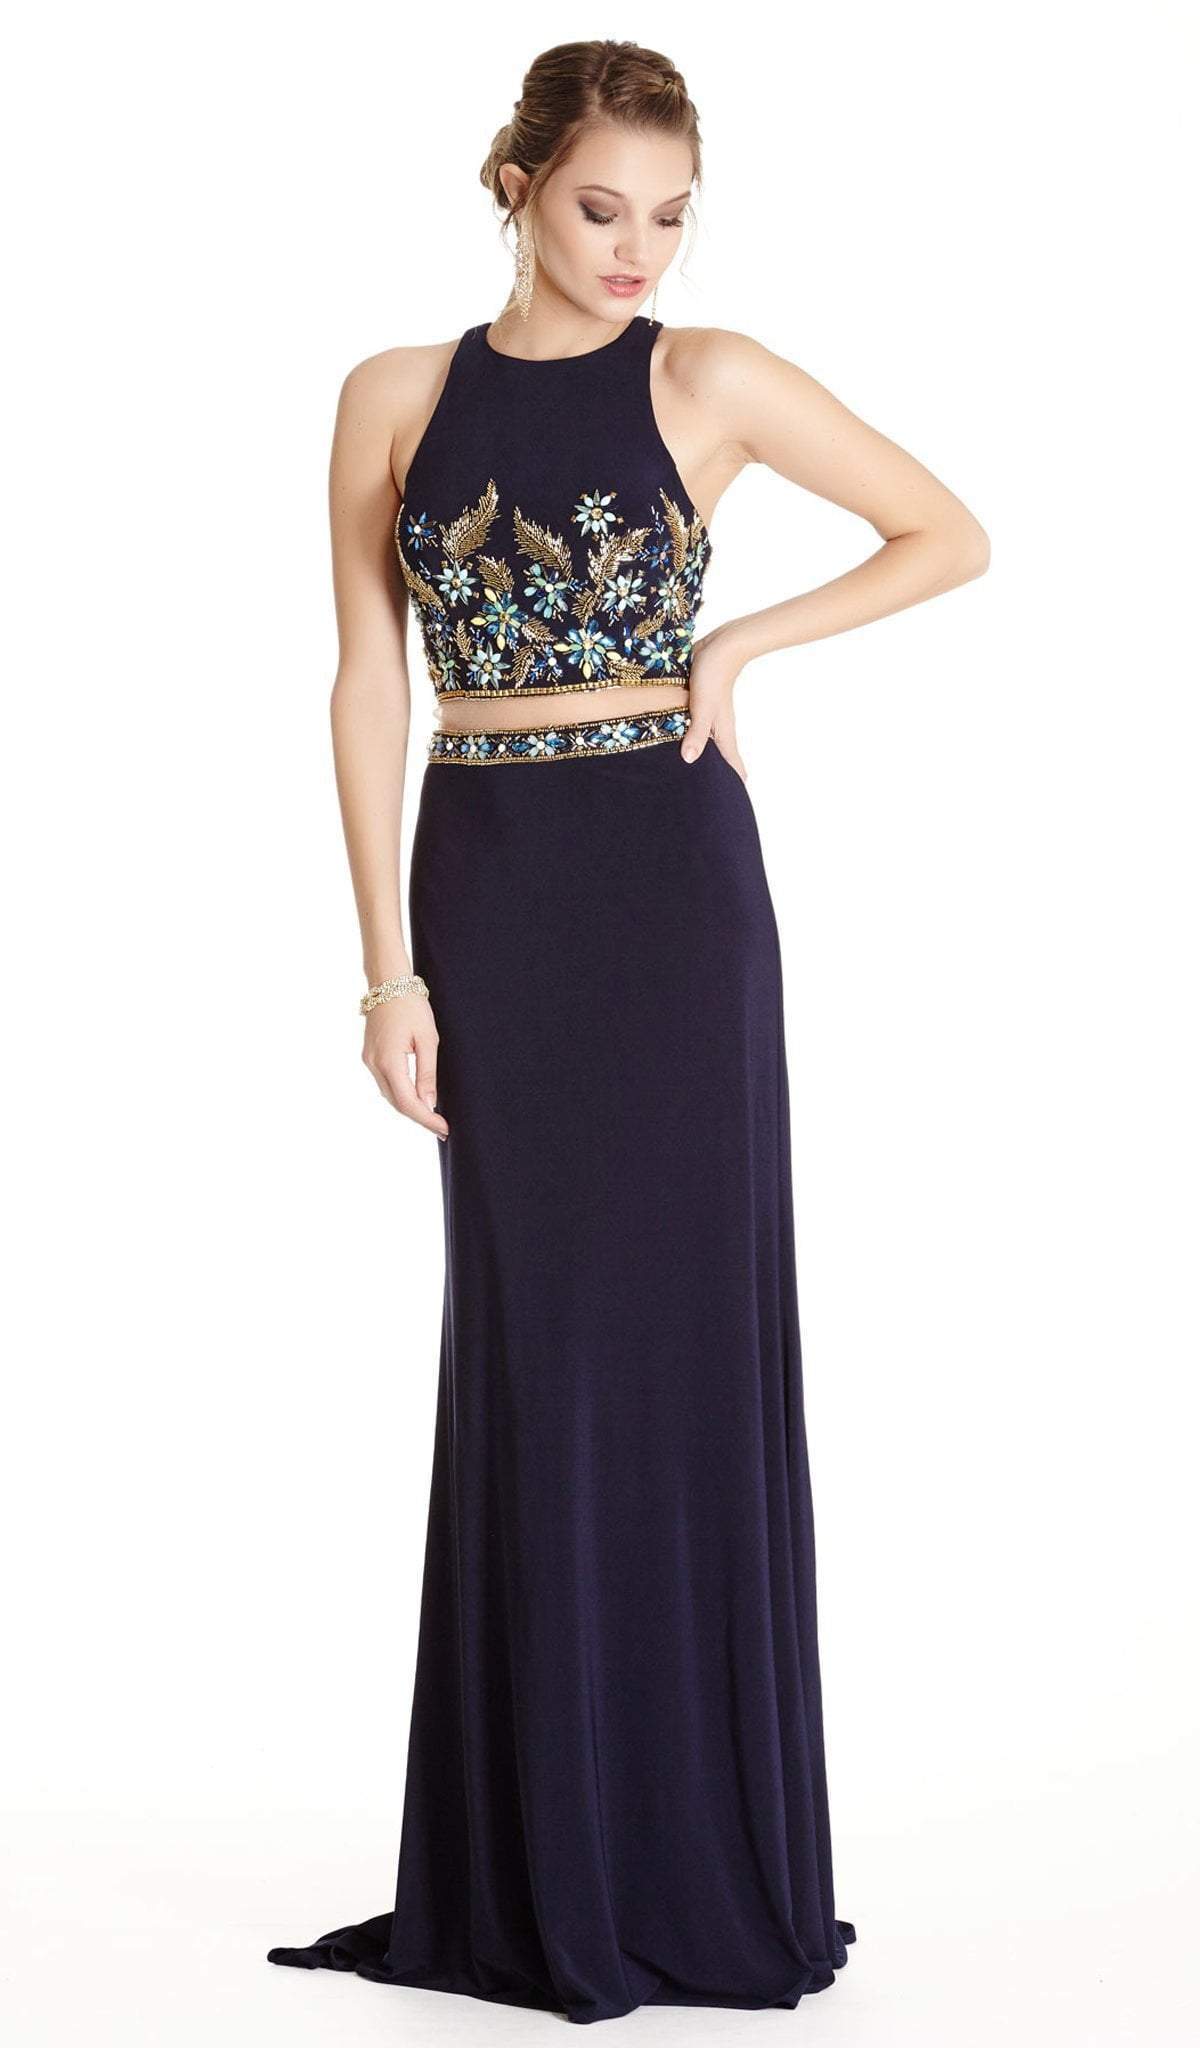 Aspeed Design - Two Piece Embroidered Halter Sheath Prom Dress
